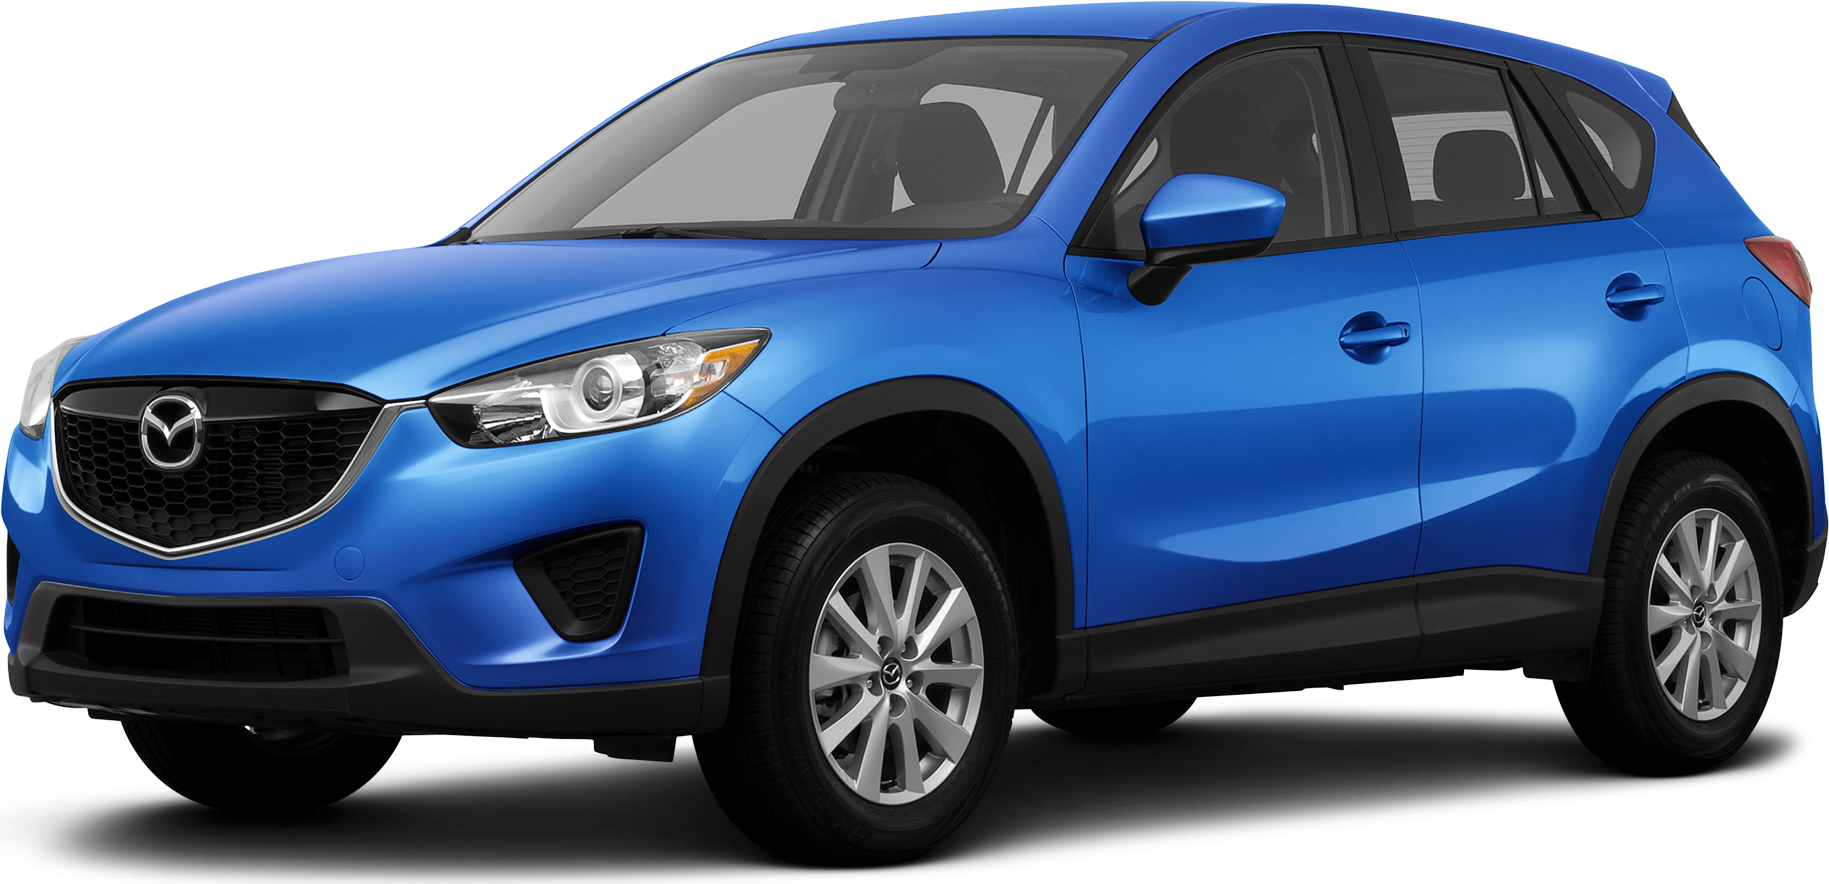 2013 Mazda Cx 5 Price Value Ratings And Reviews Kelley Blue Book